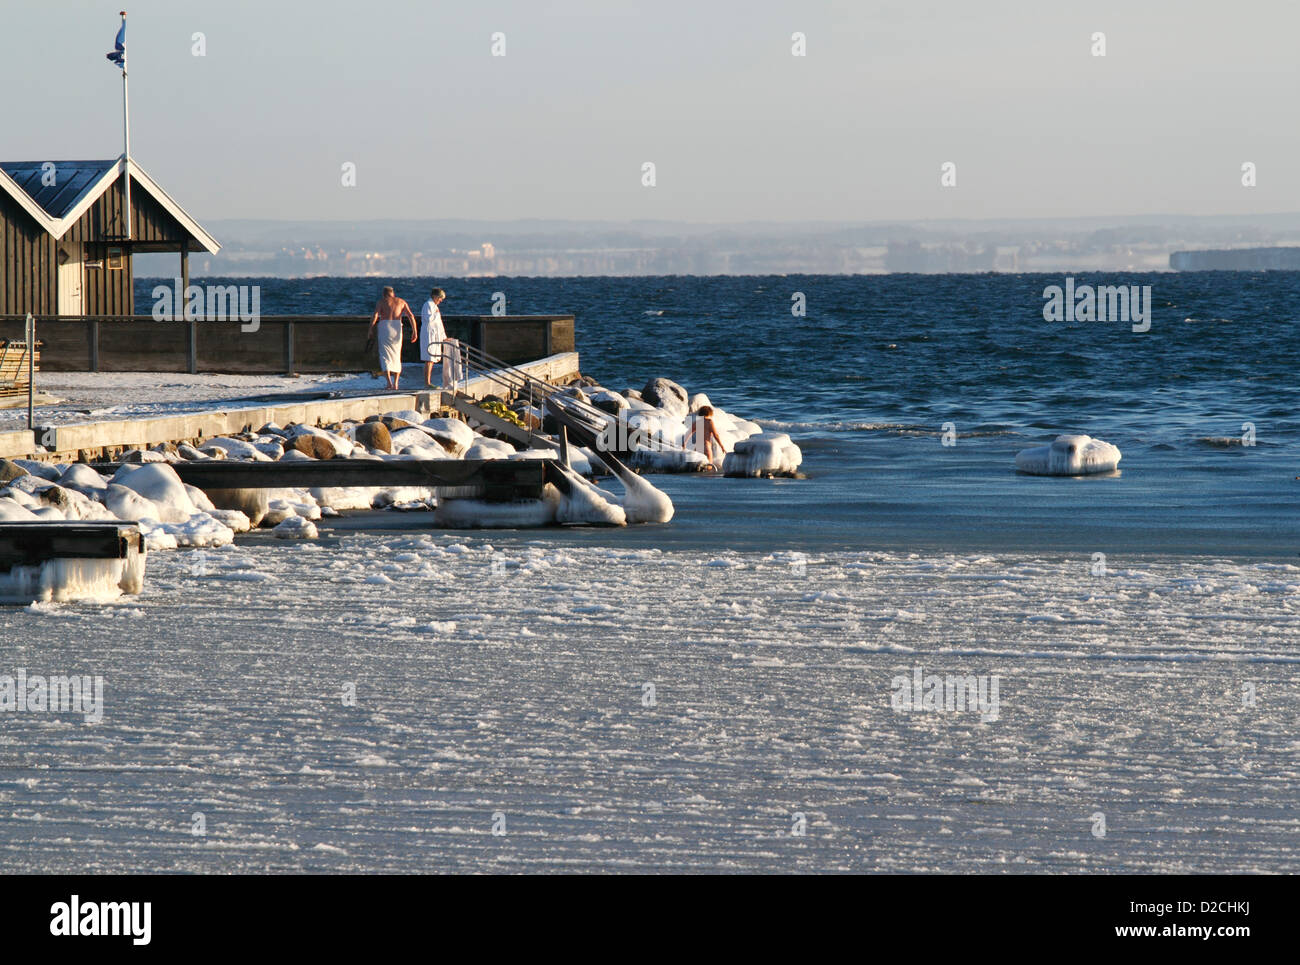 Winter swimmers jumping into the icy Sound at Rungsted harbour, Denmark.  Flag and warm club house to the left. Stock Photo